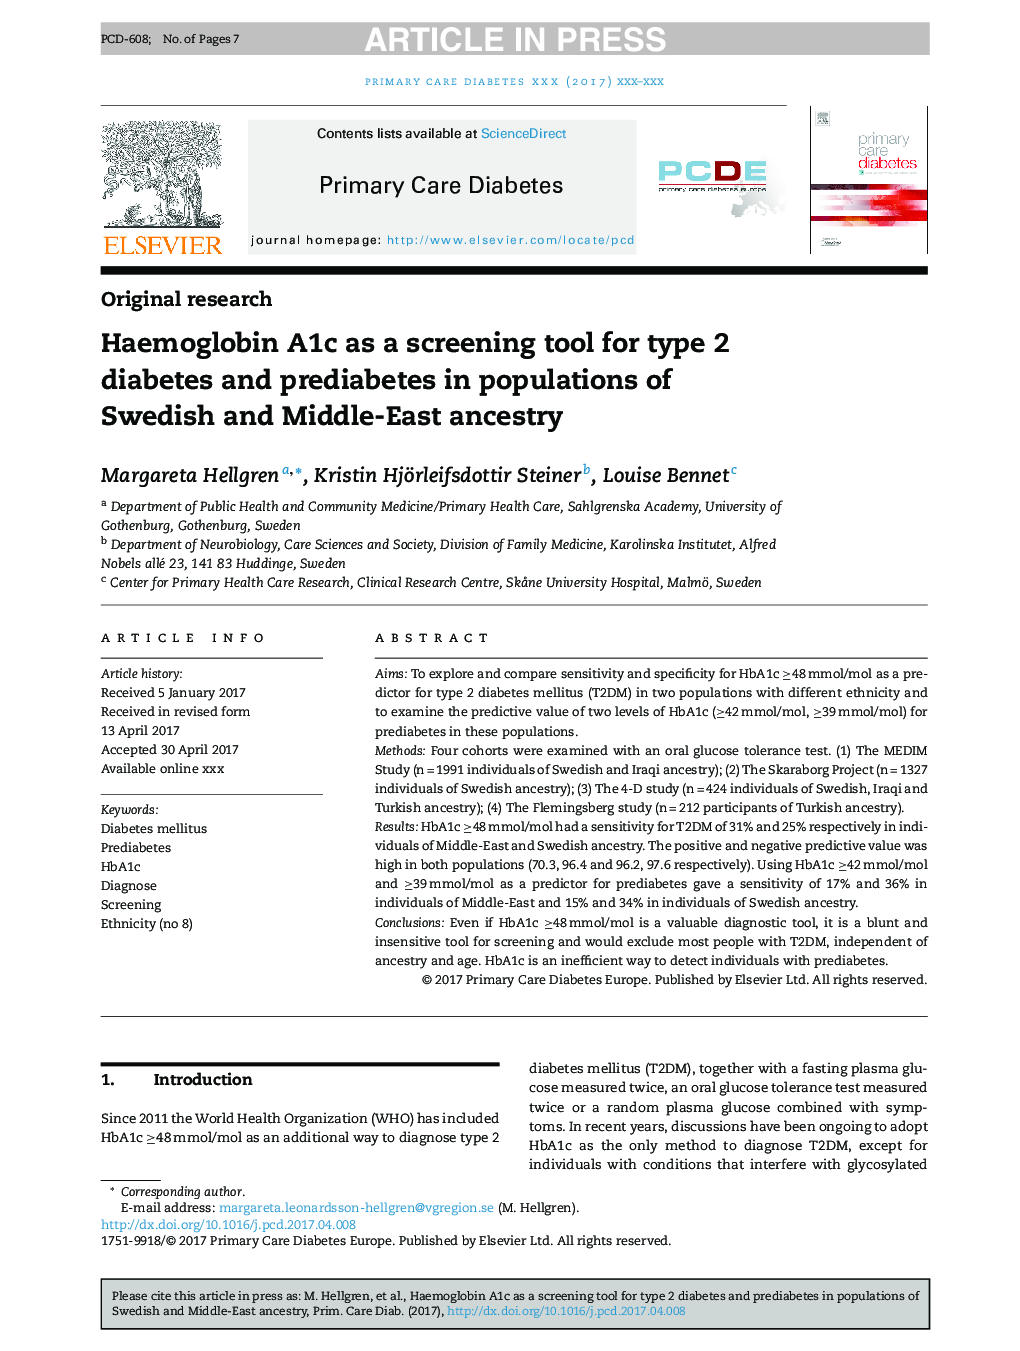 Haemoglobin A1c as a screening tool for type 2 diabetes and prediabetes in populations of Swedish and Middle-East ancestry